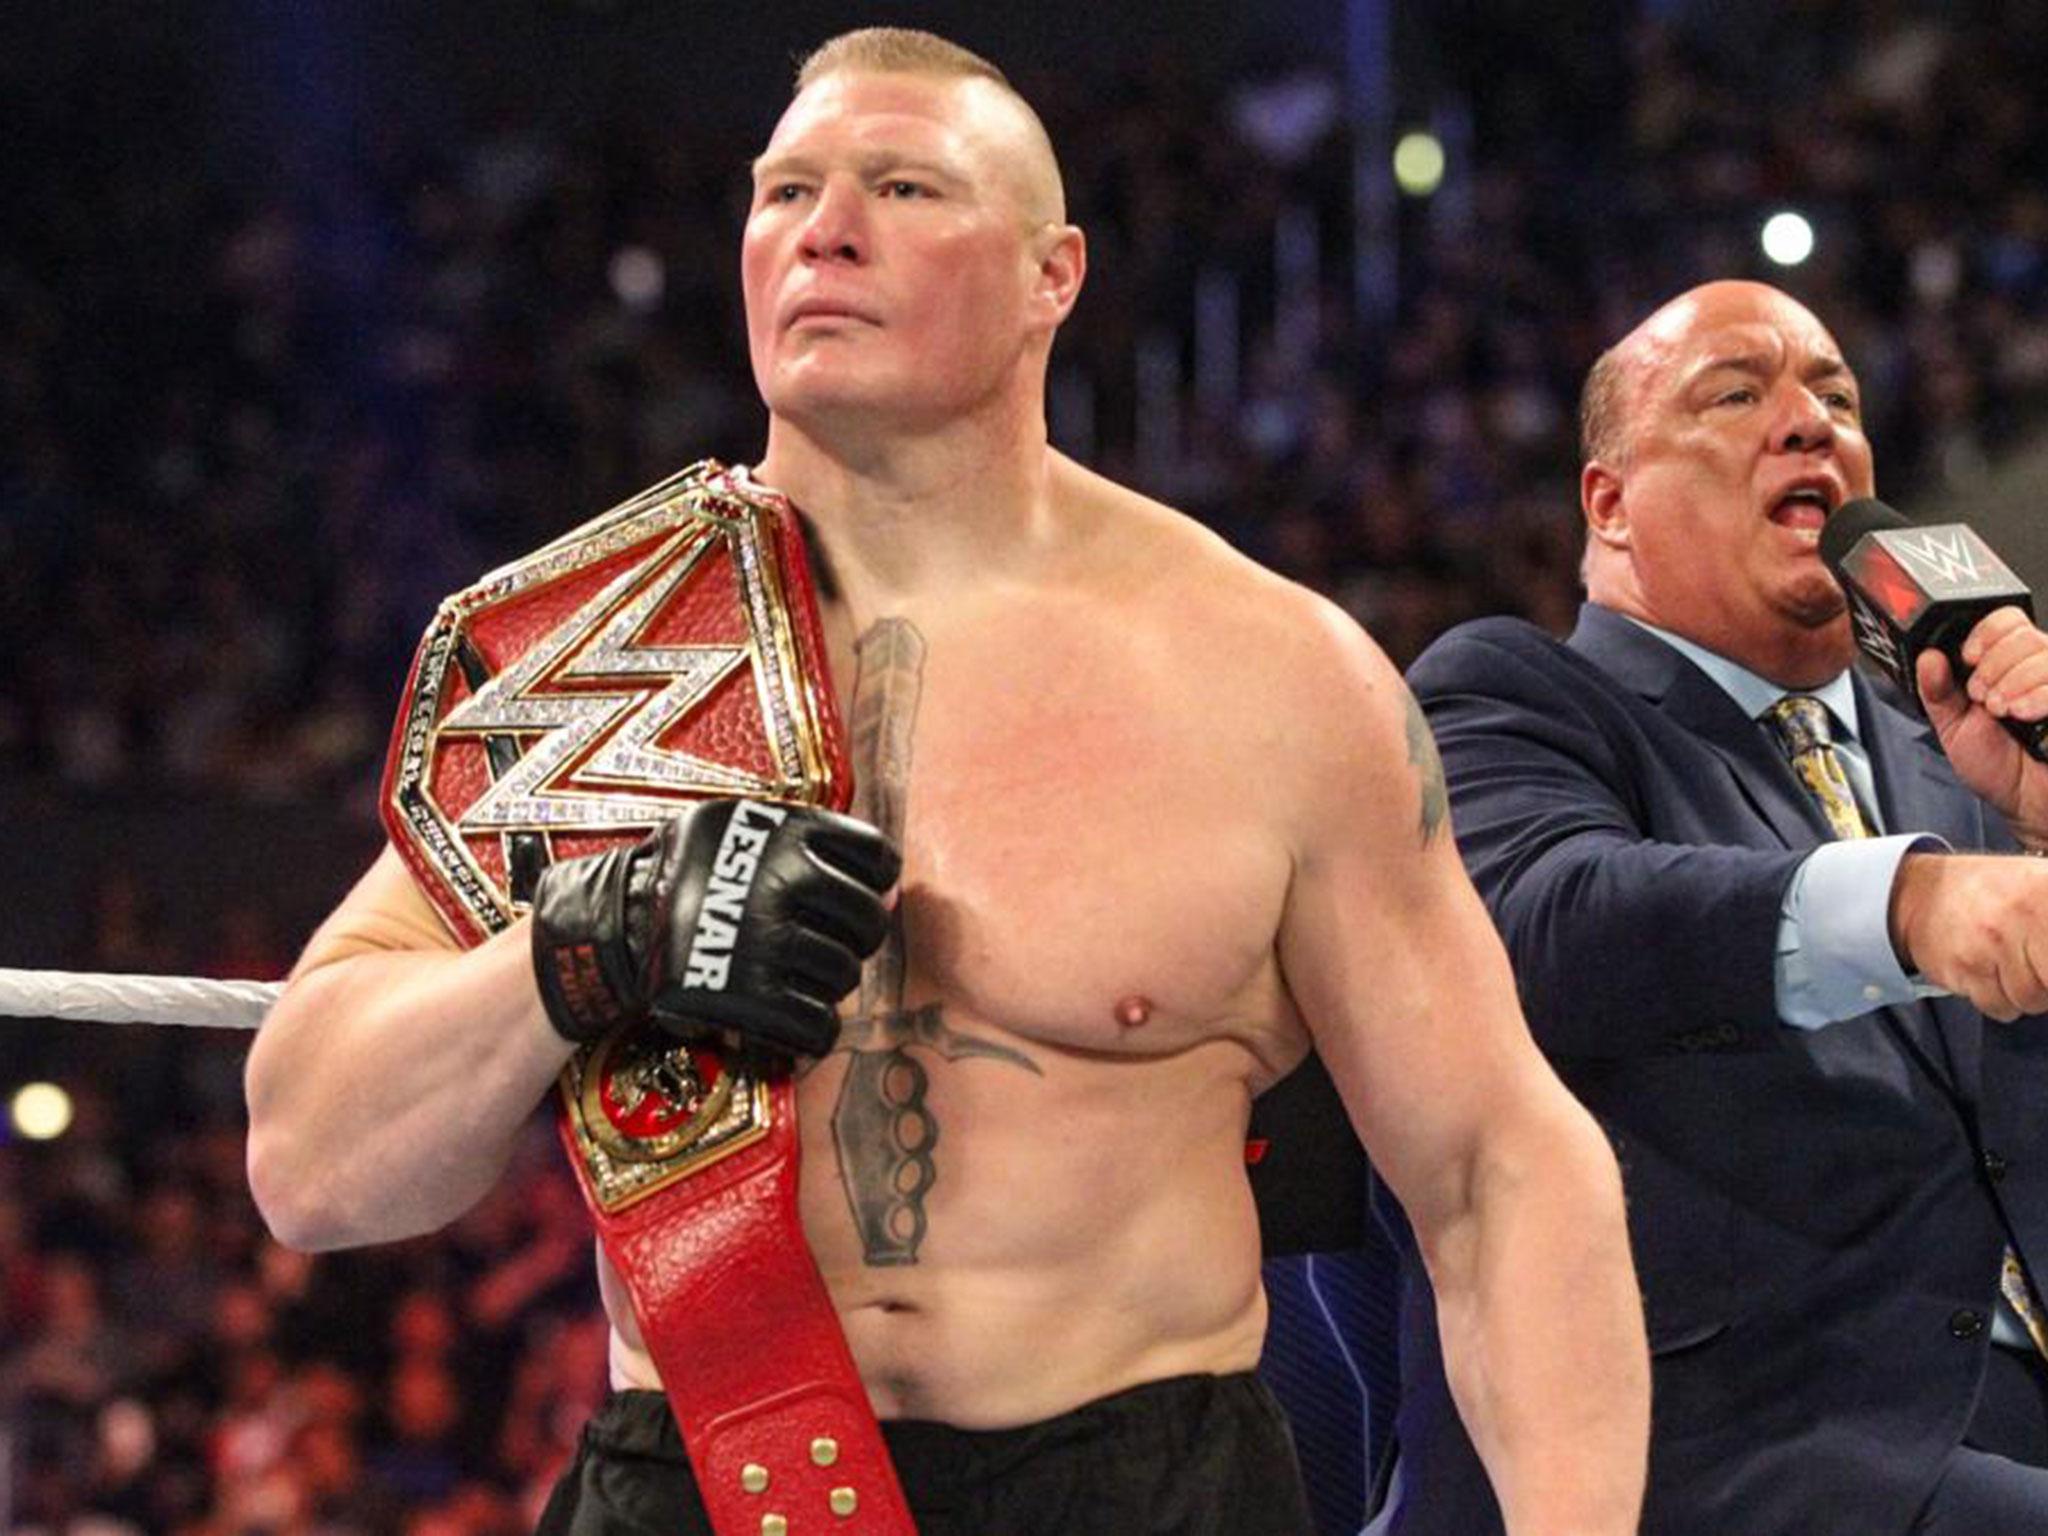 Xnxx Brock Lesner - Paige sex tape leak caused WWE star to develop anorexia